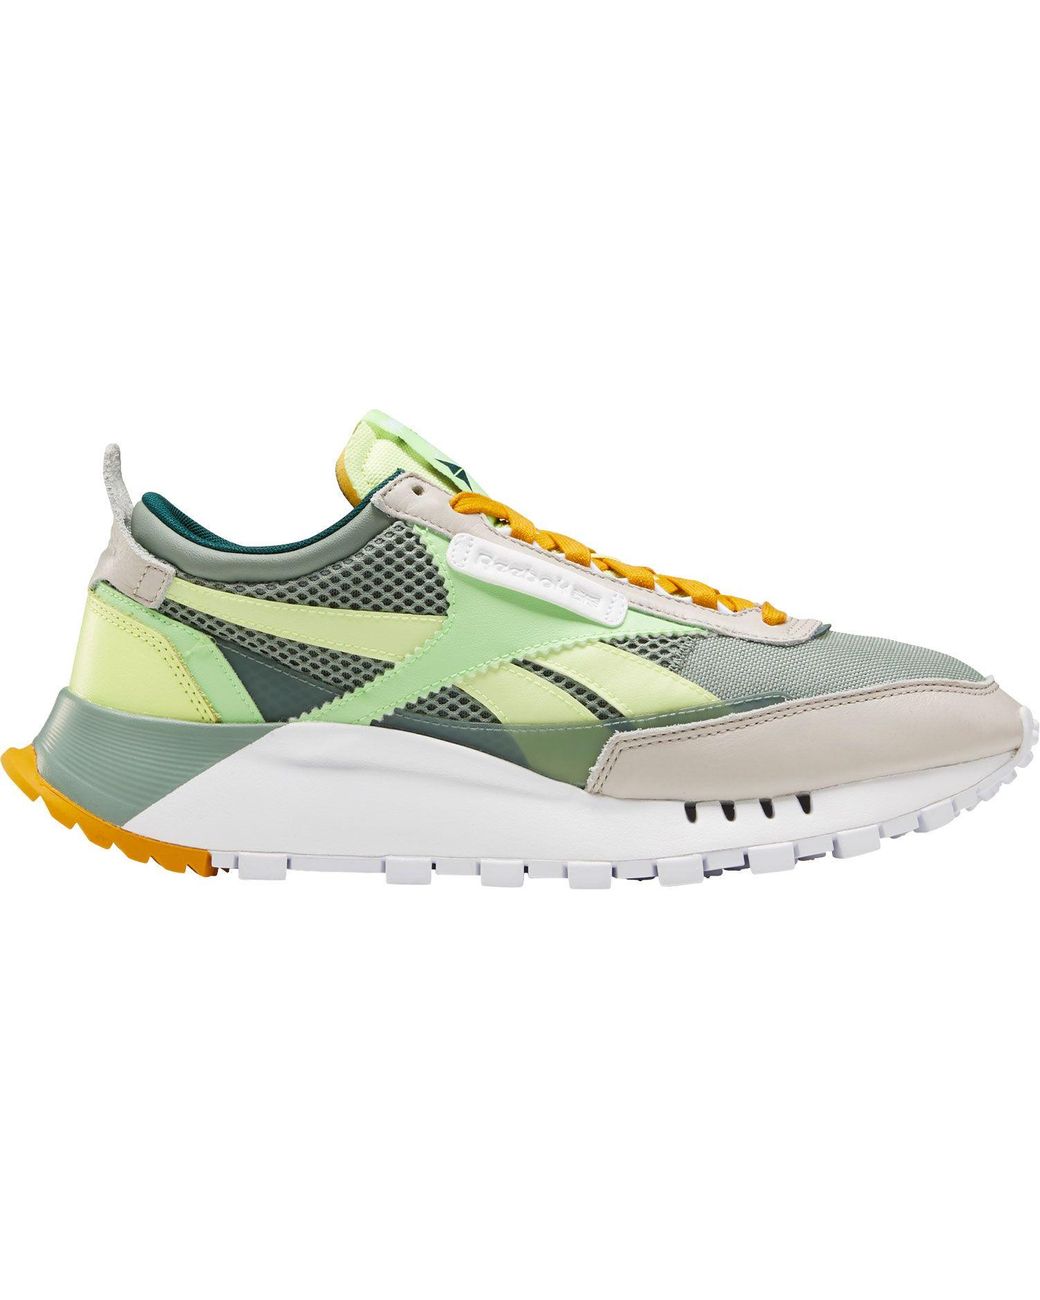 Reebok Classic Leather Legacy Shoes in Green/Yellow (Green) for Men - Lyst